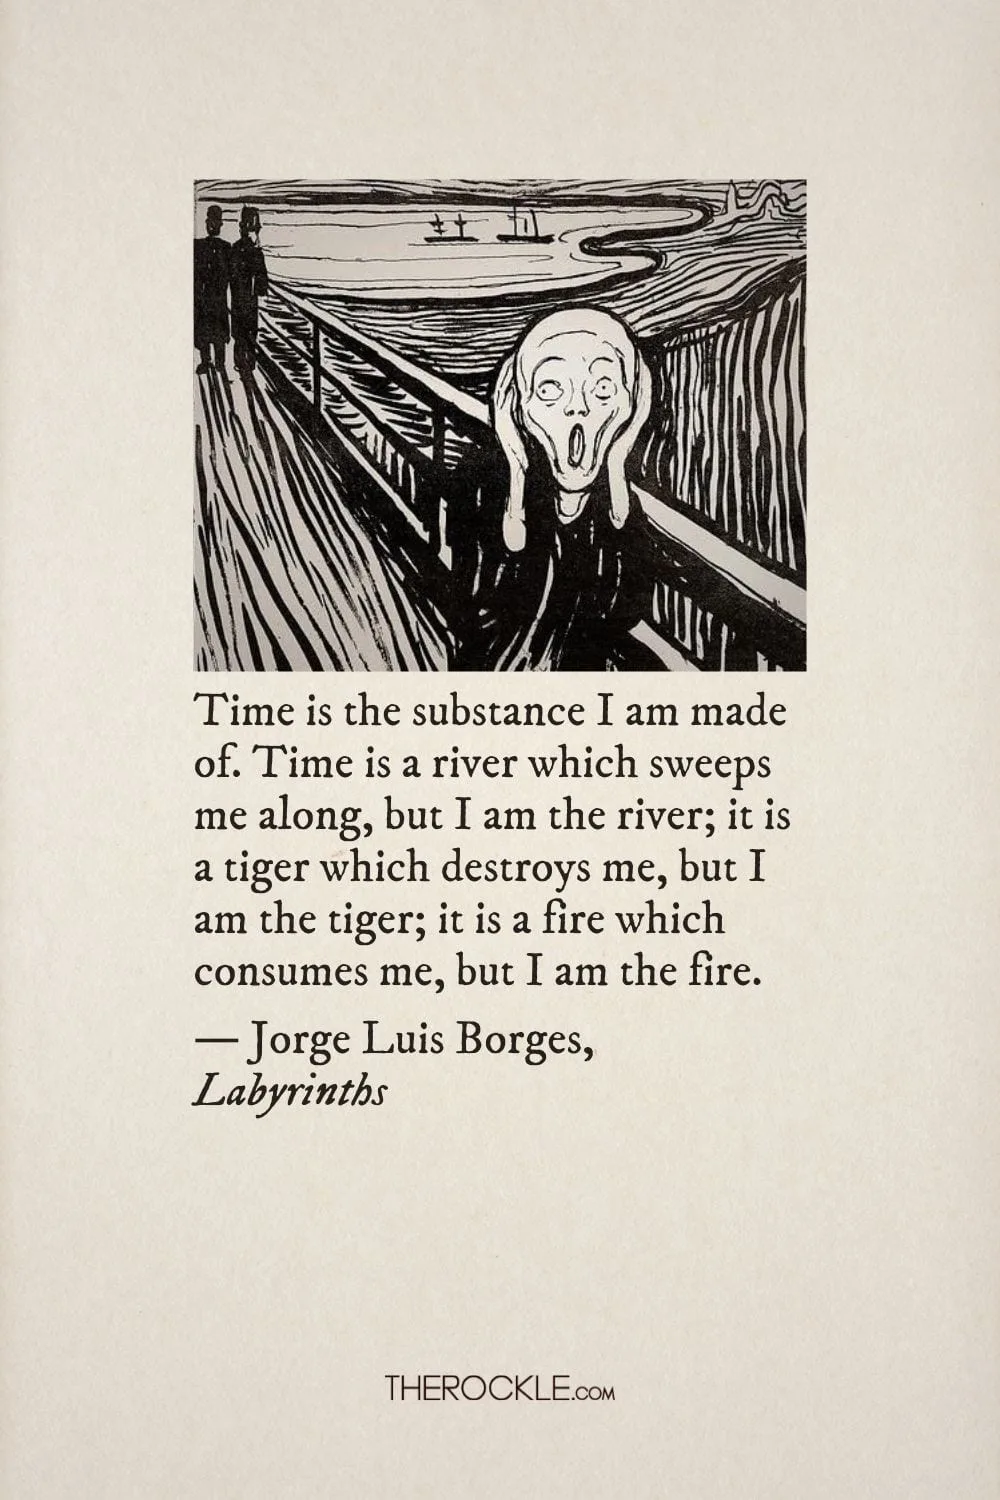 Borges on nature of time and self